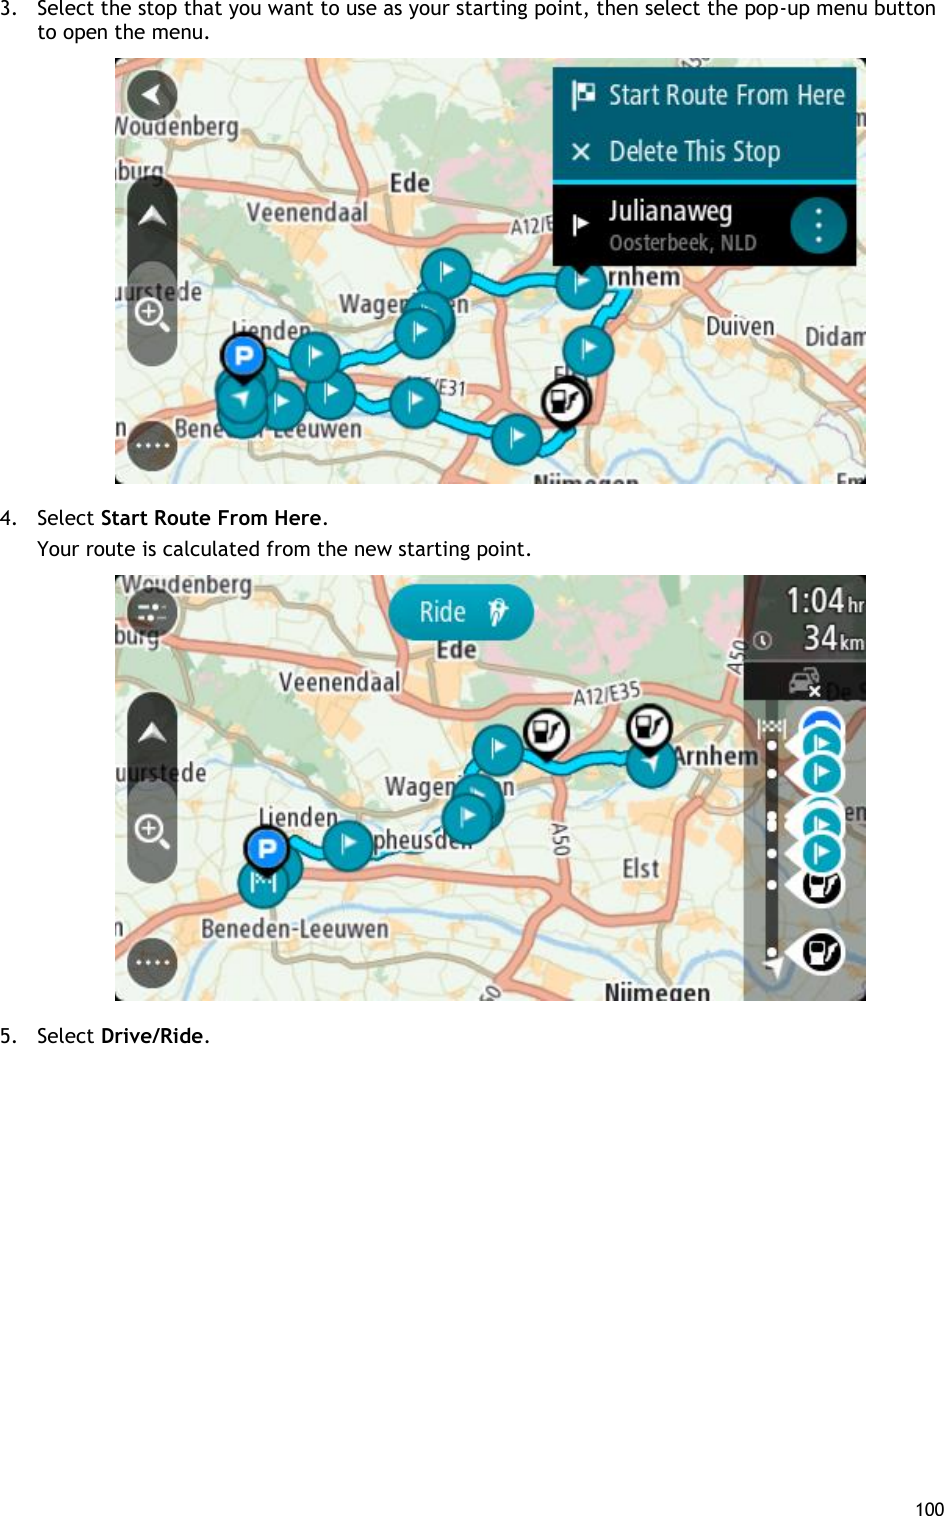  100  3. Select the stop that you want to use as your starting point, then select the pop-up menu button to open the menu.  4. Select Start Route From Here. Your route is calculated from the new starting point.  5. Select Drive/Ride. 